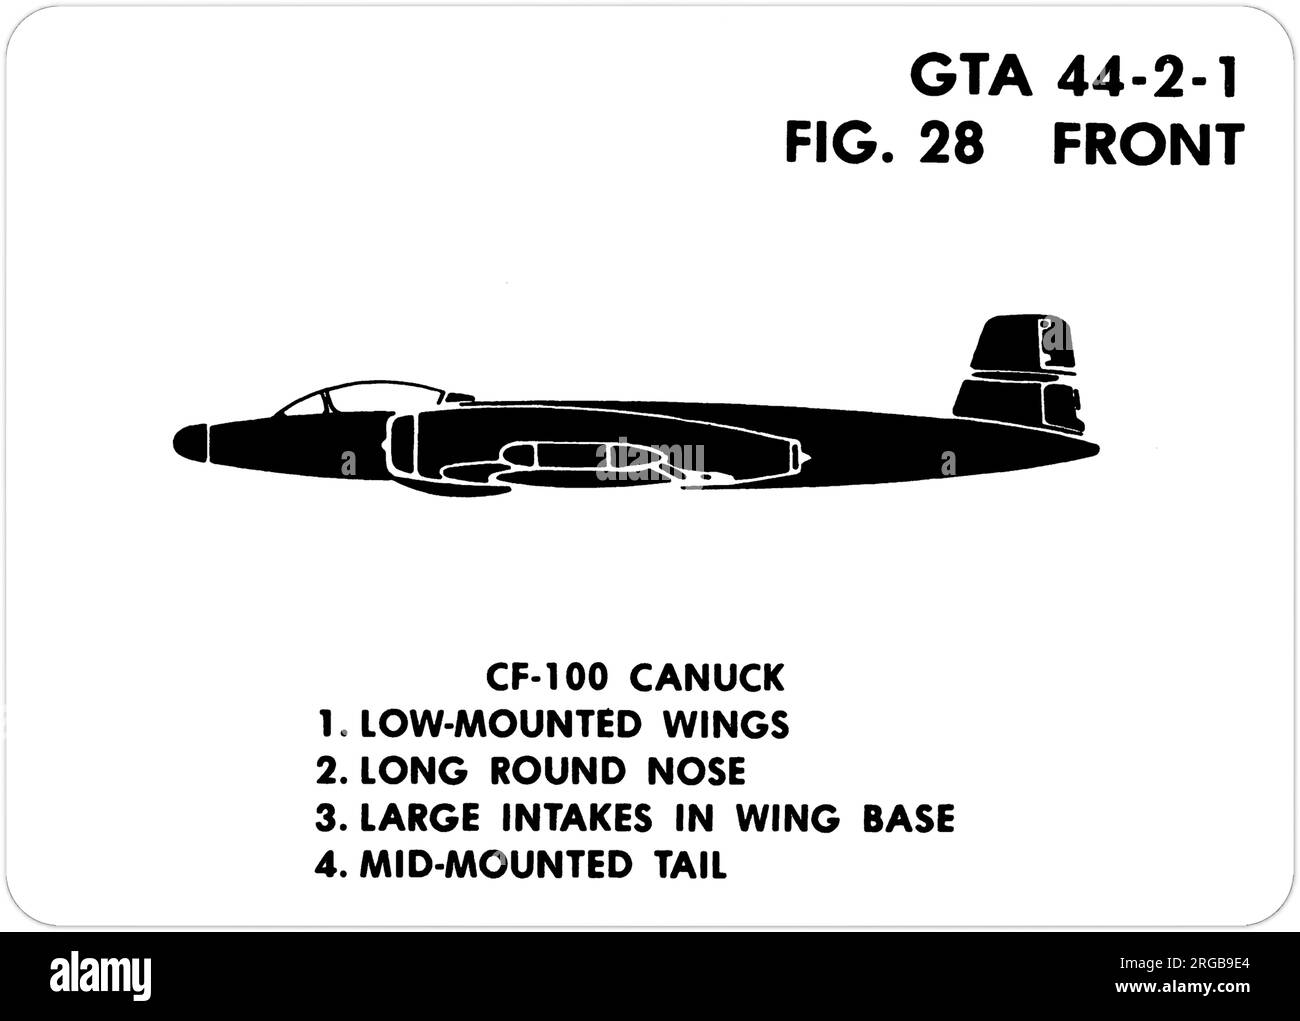 Avro Canada CF-100 Canuck. This is one of the series of Graphics Training Aids (GTA) used by the United States Army to train their personnel to recognize friendly and hostile aircraft. This particular set, GTA 44-2-1, was issued in July1977. The set features aircraft from: Canada, Italy, United Kingdom, United States, and the USSR. Stock Photo